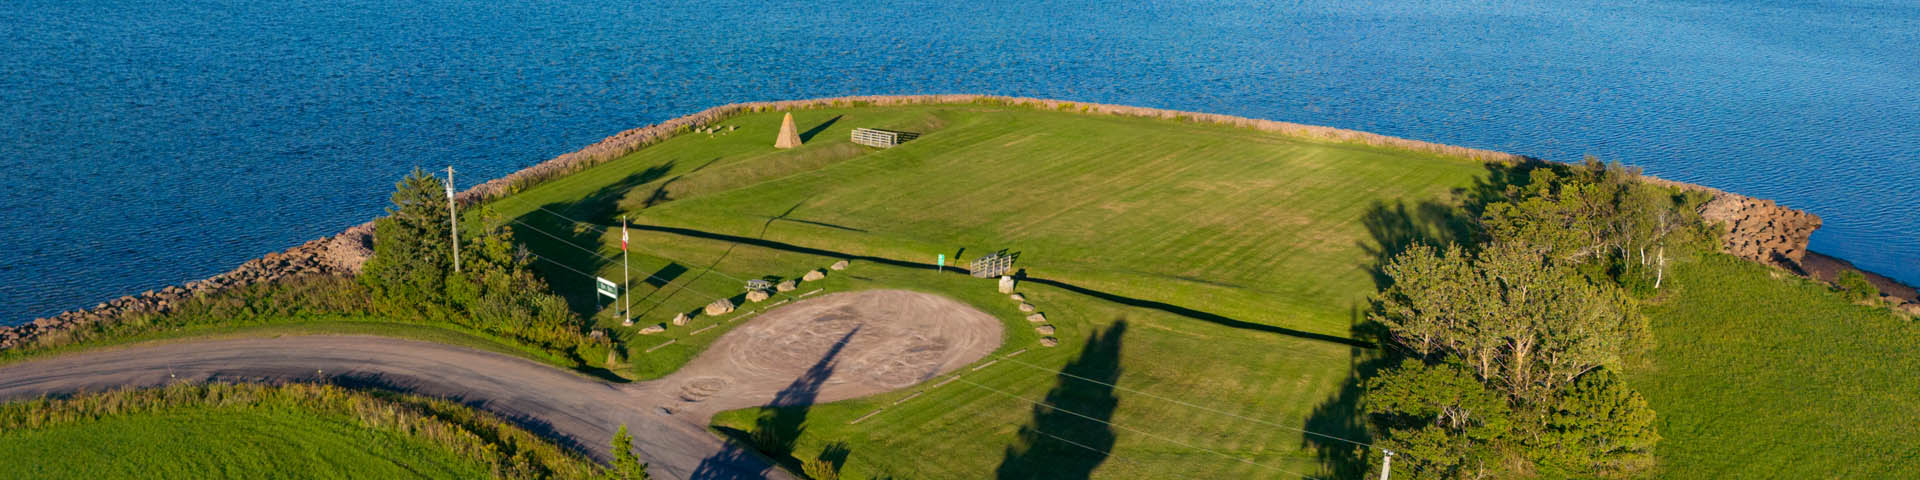 Aerial view of Fort Gaspareaux